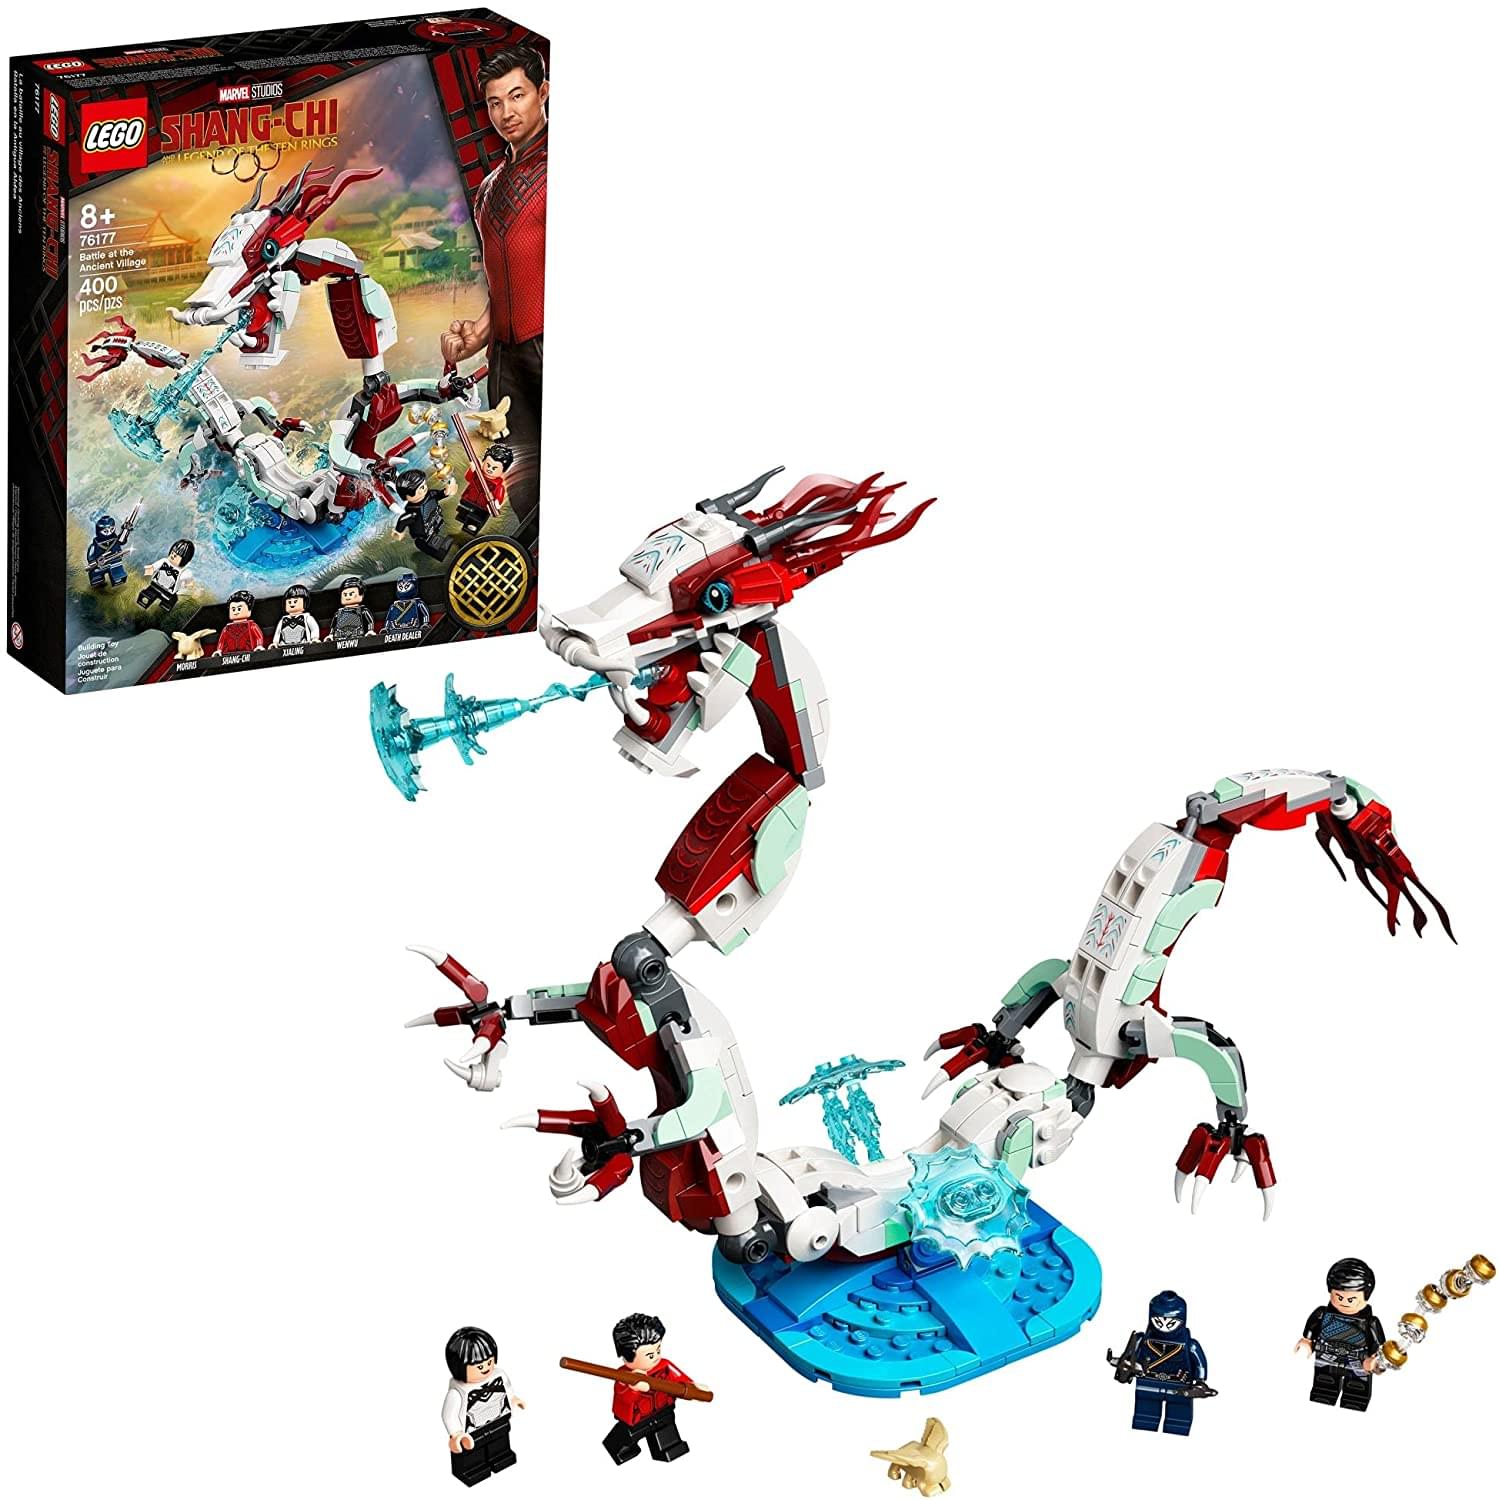 LEGO Marvel 76177 Shang-Chi Battle At The Ancient Village 400 Piece Building Kit